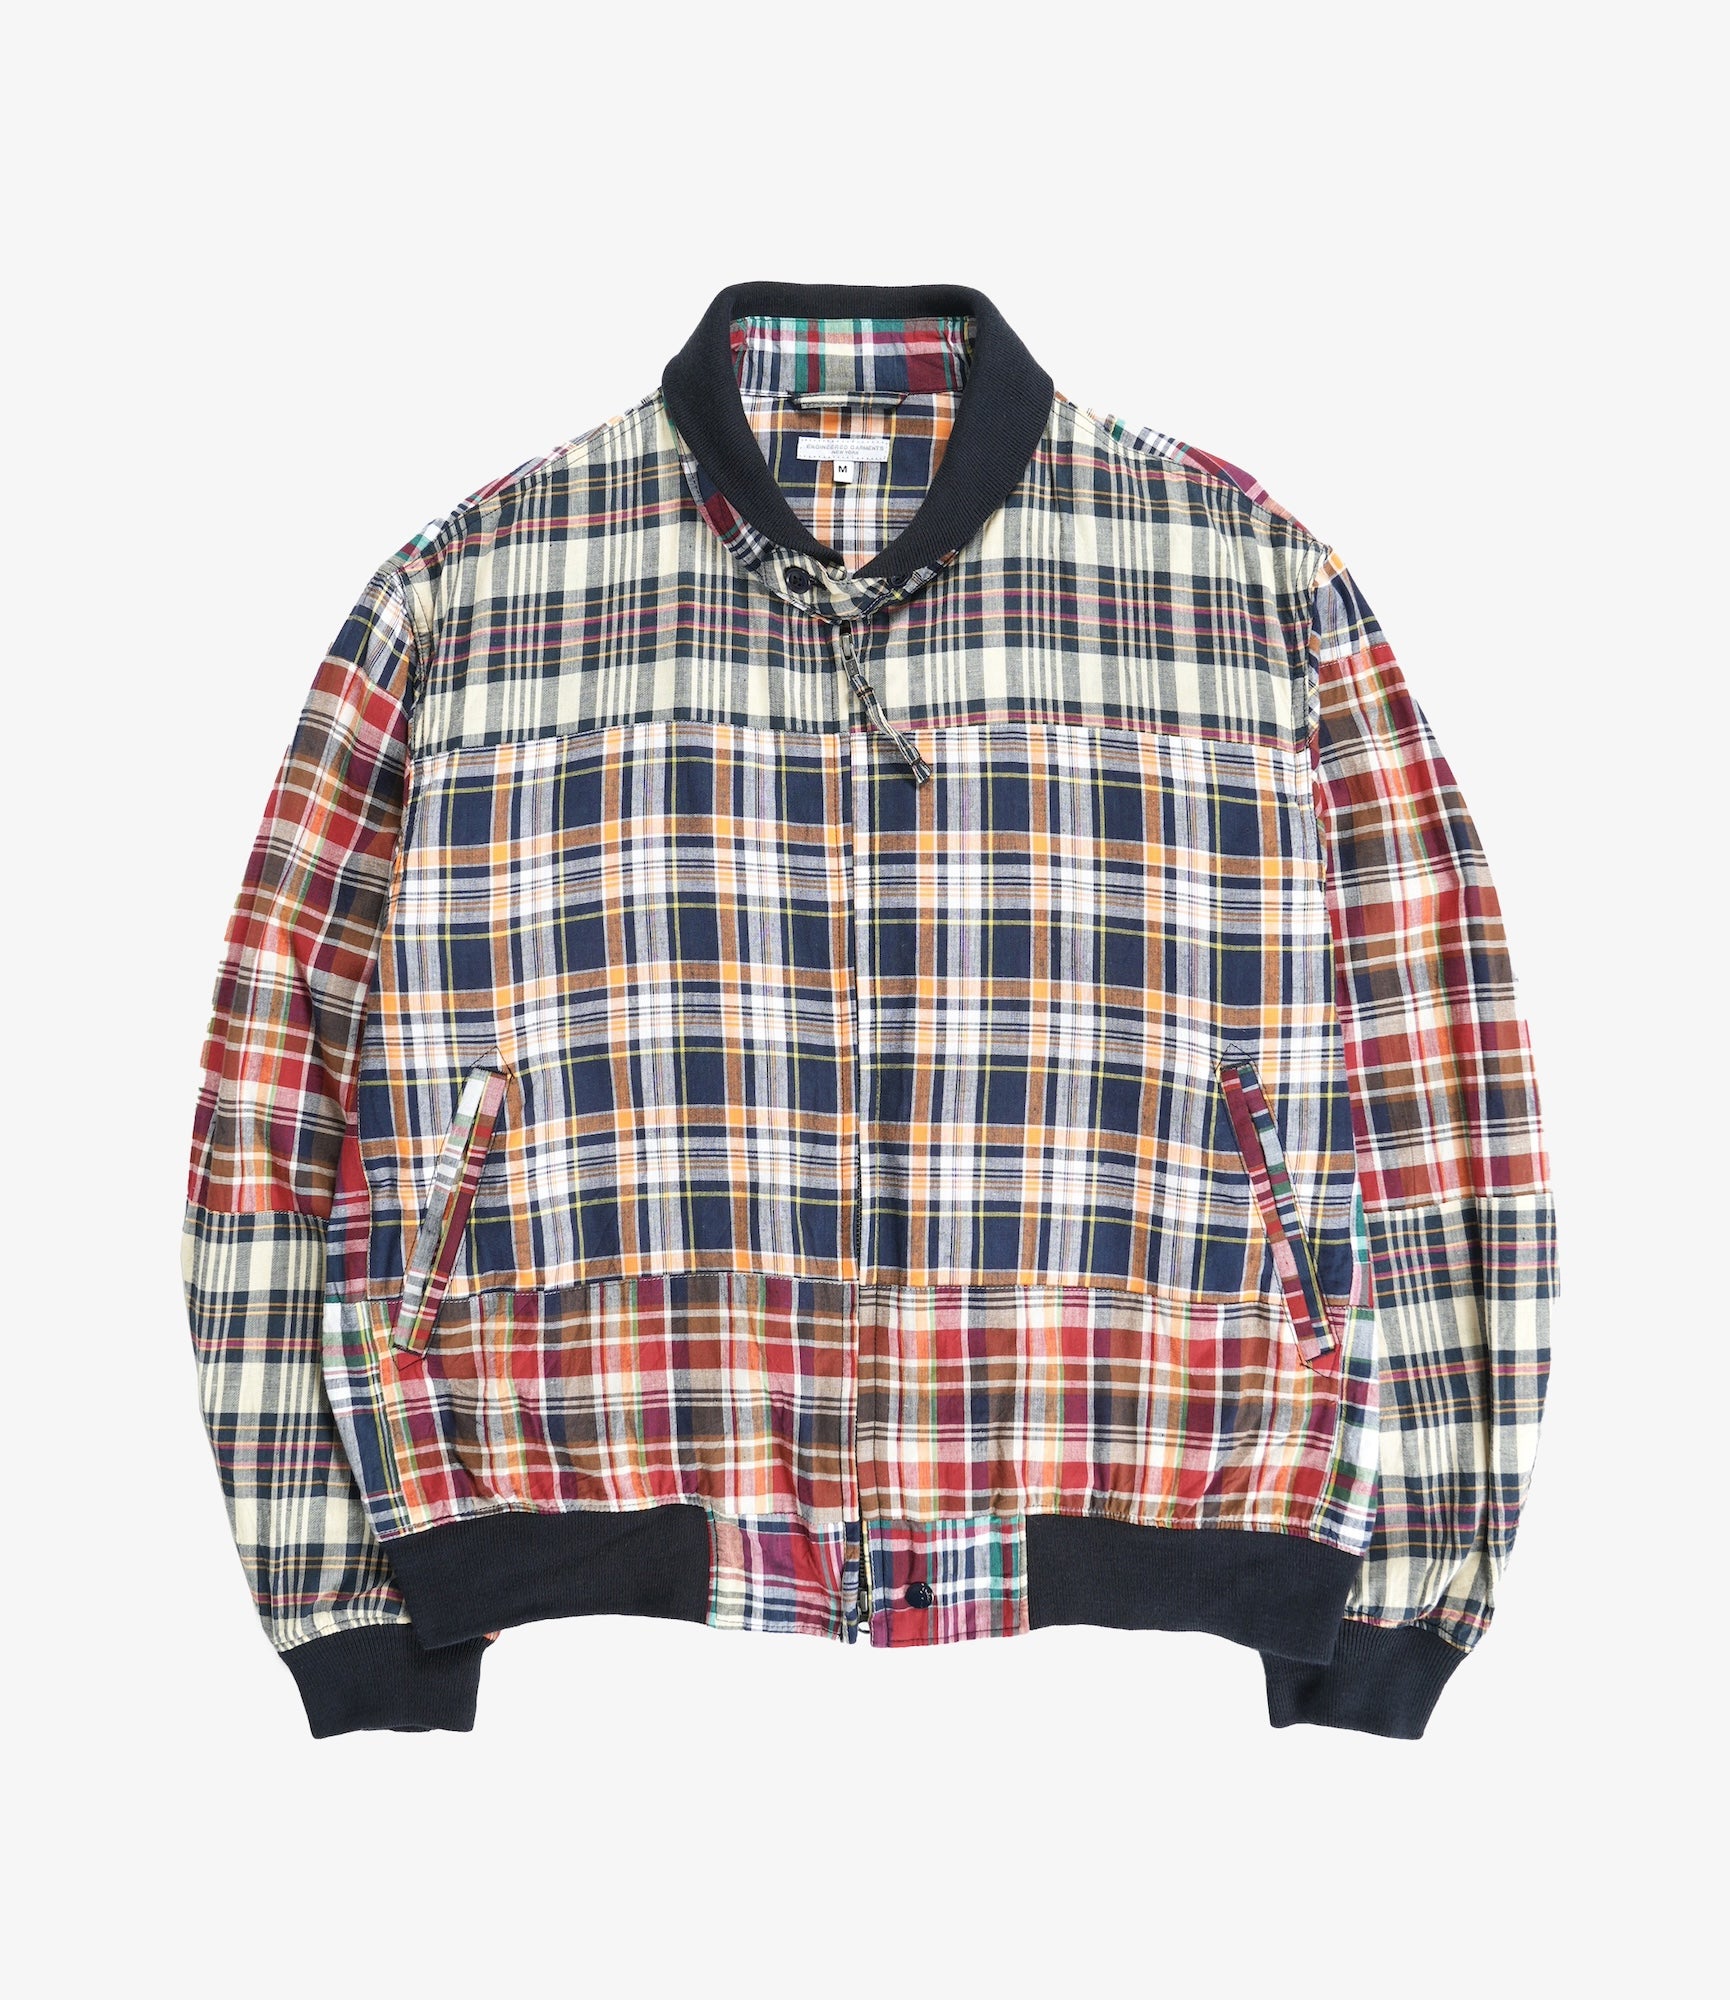 Engineered Garments LL Jacket - Navy Square Patchwork Madras